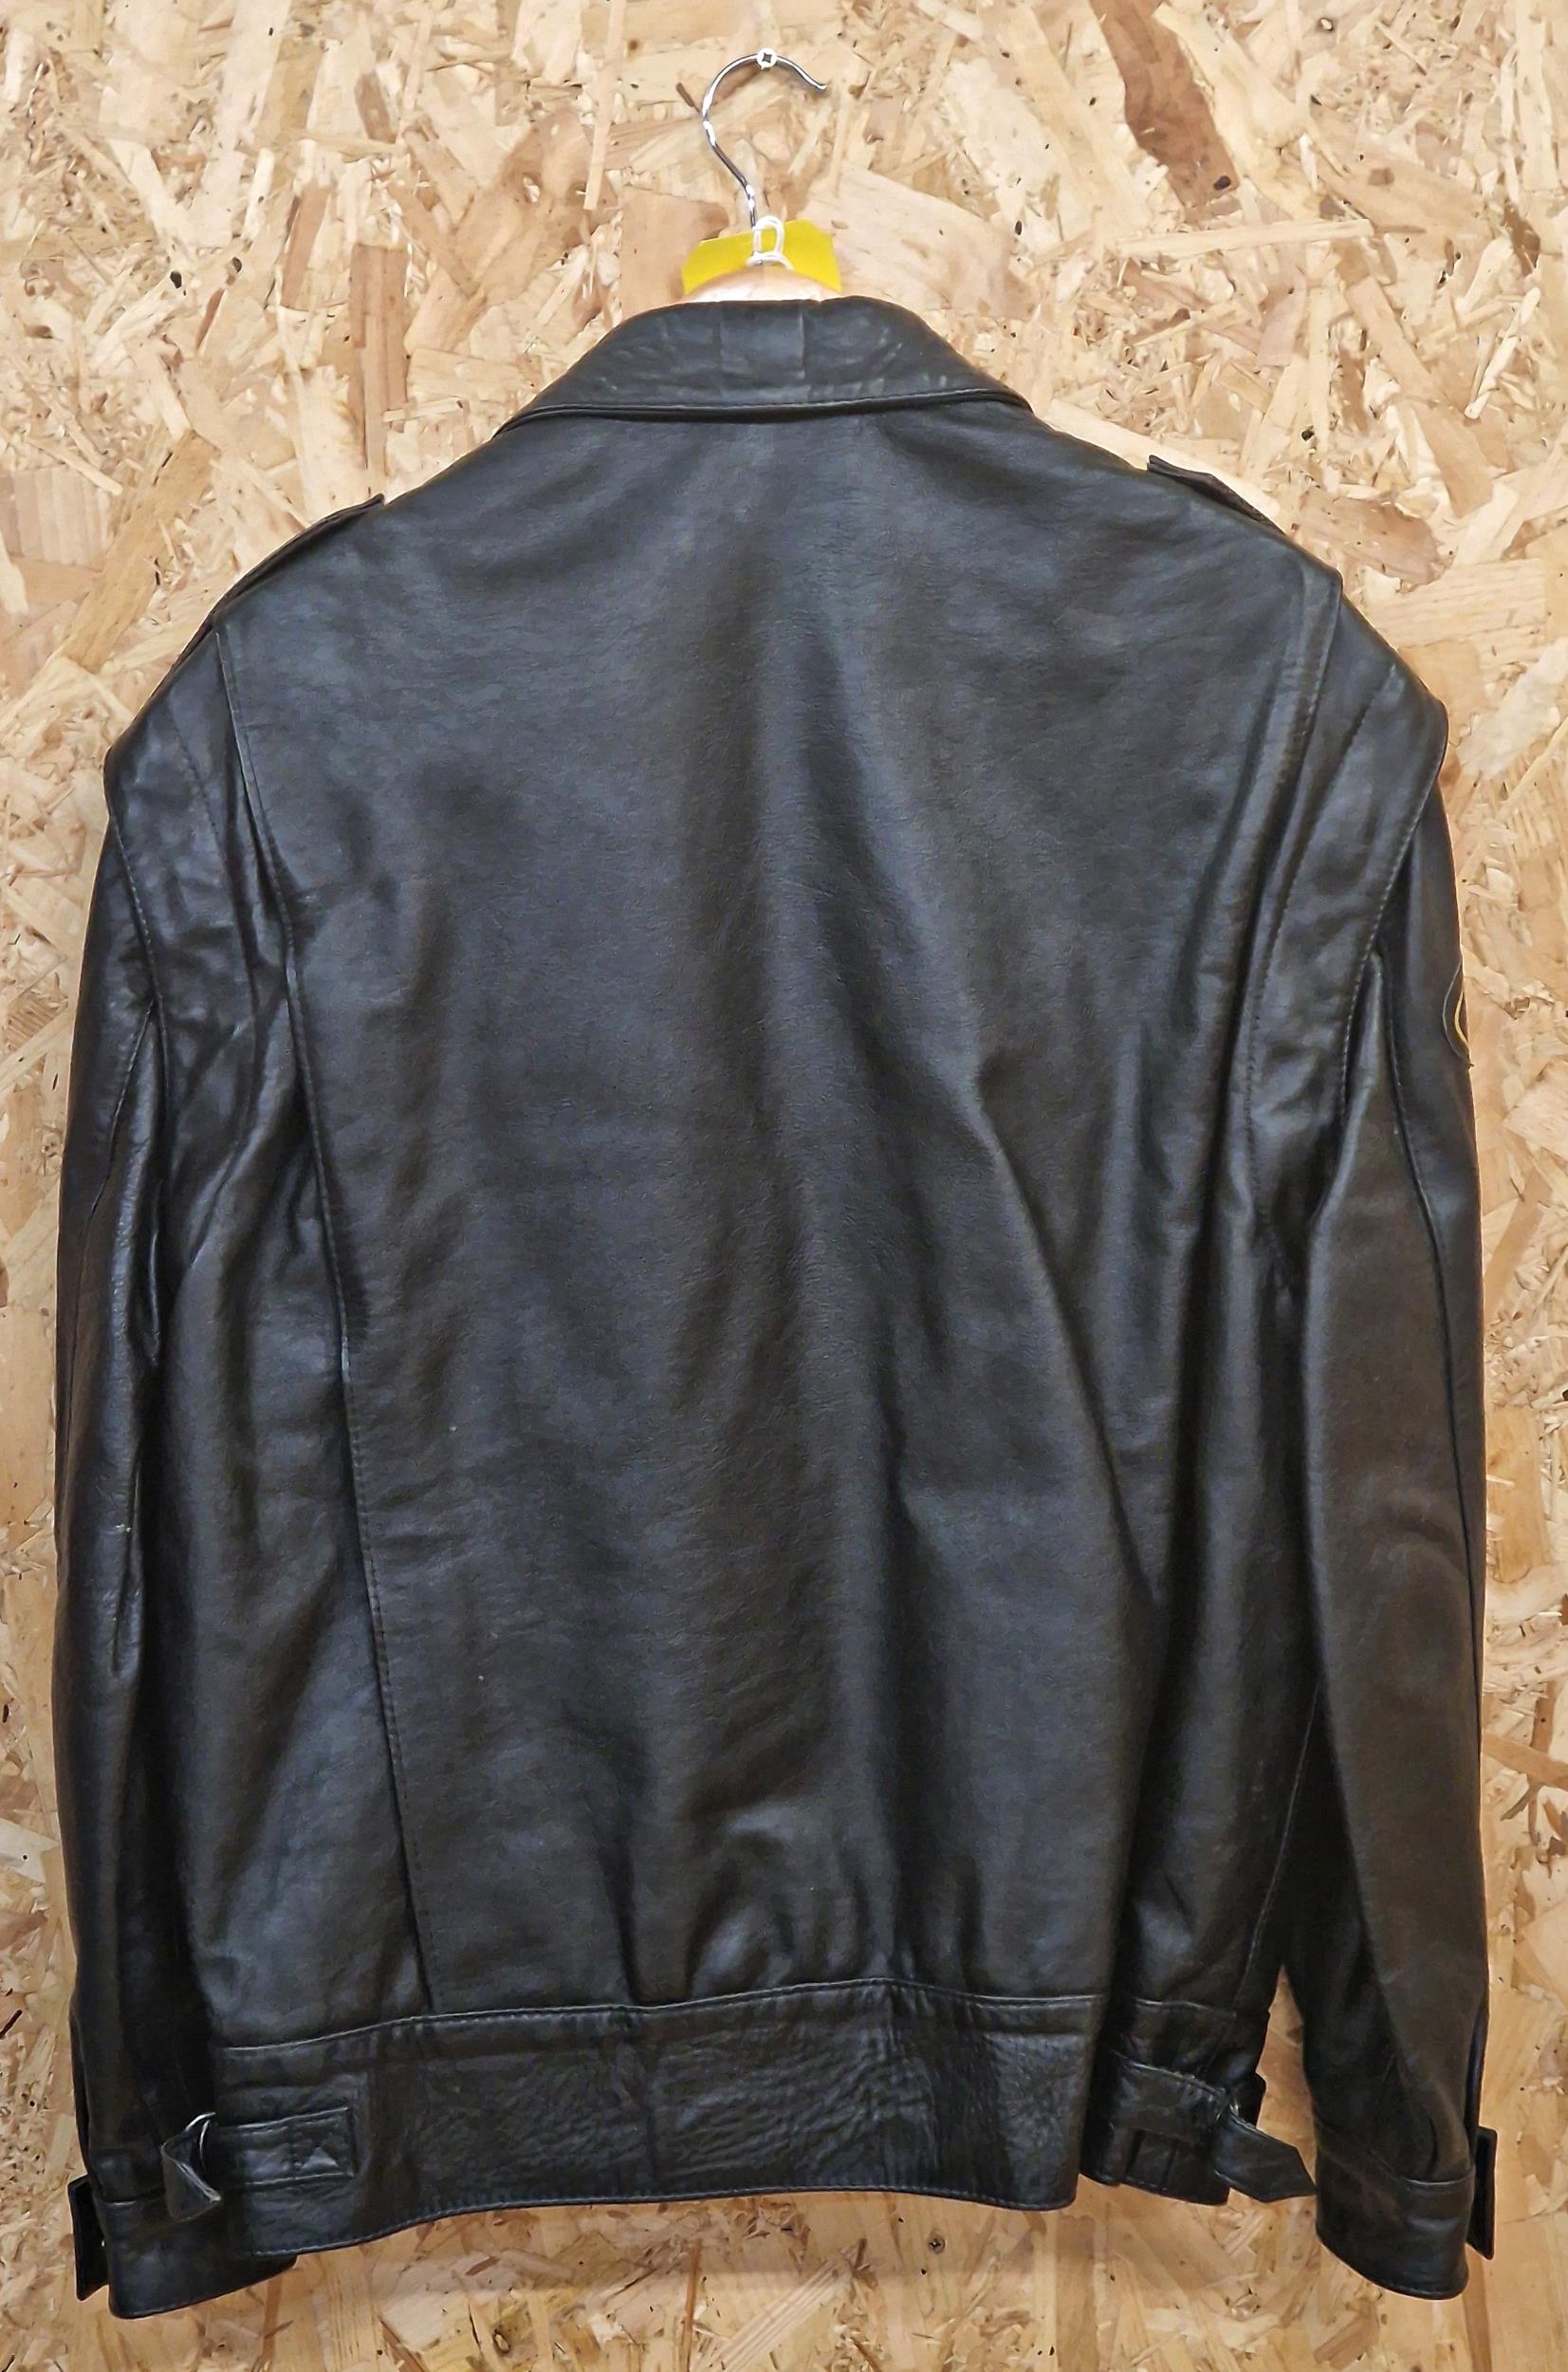 Rare U2 The Joshua Tree 1987/1988 Leather Crew Jacket. Size L. Mint, Unworn Condition With - Image 2 of 4